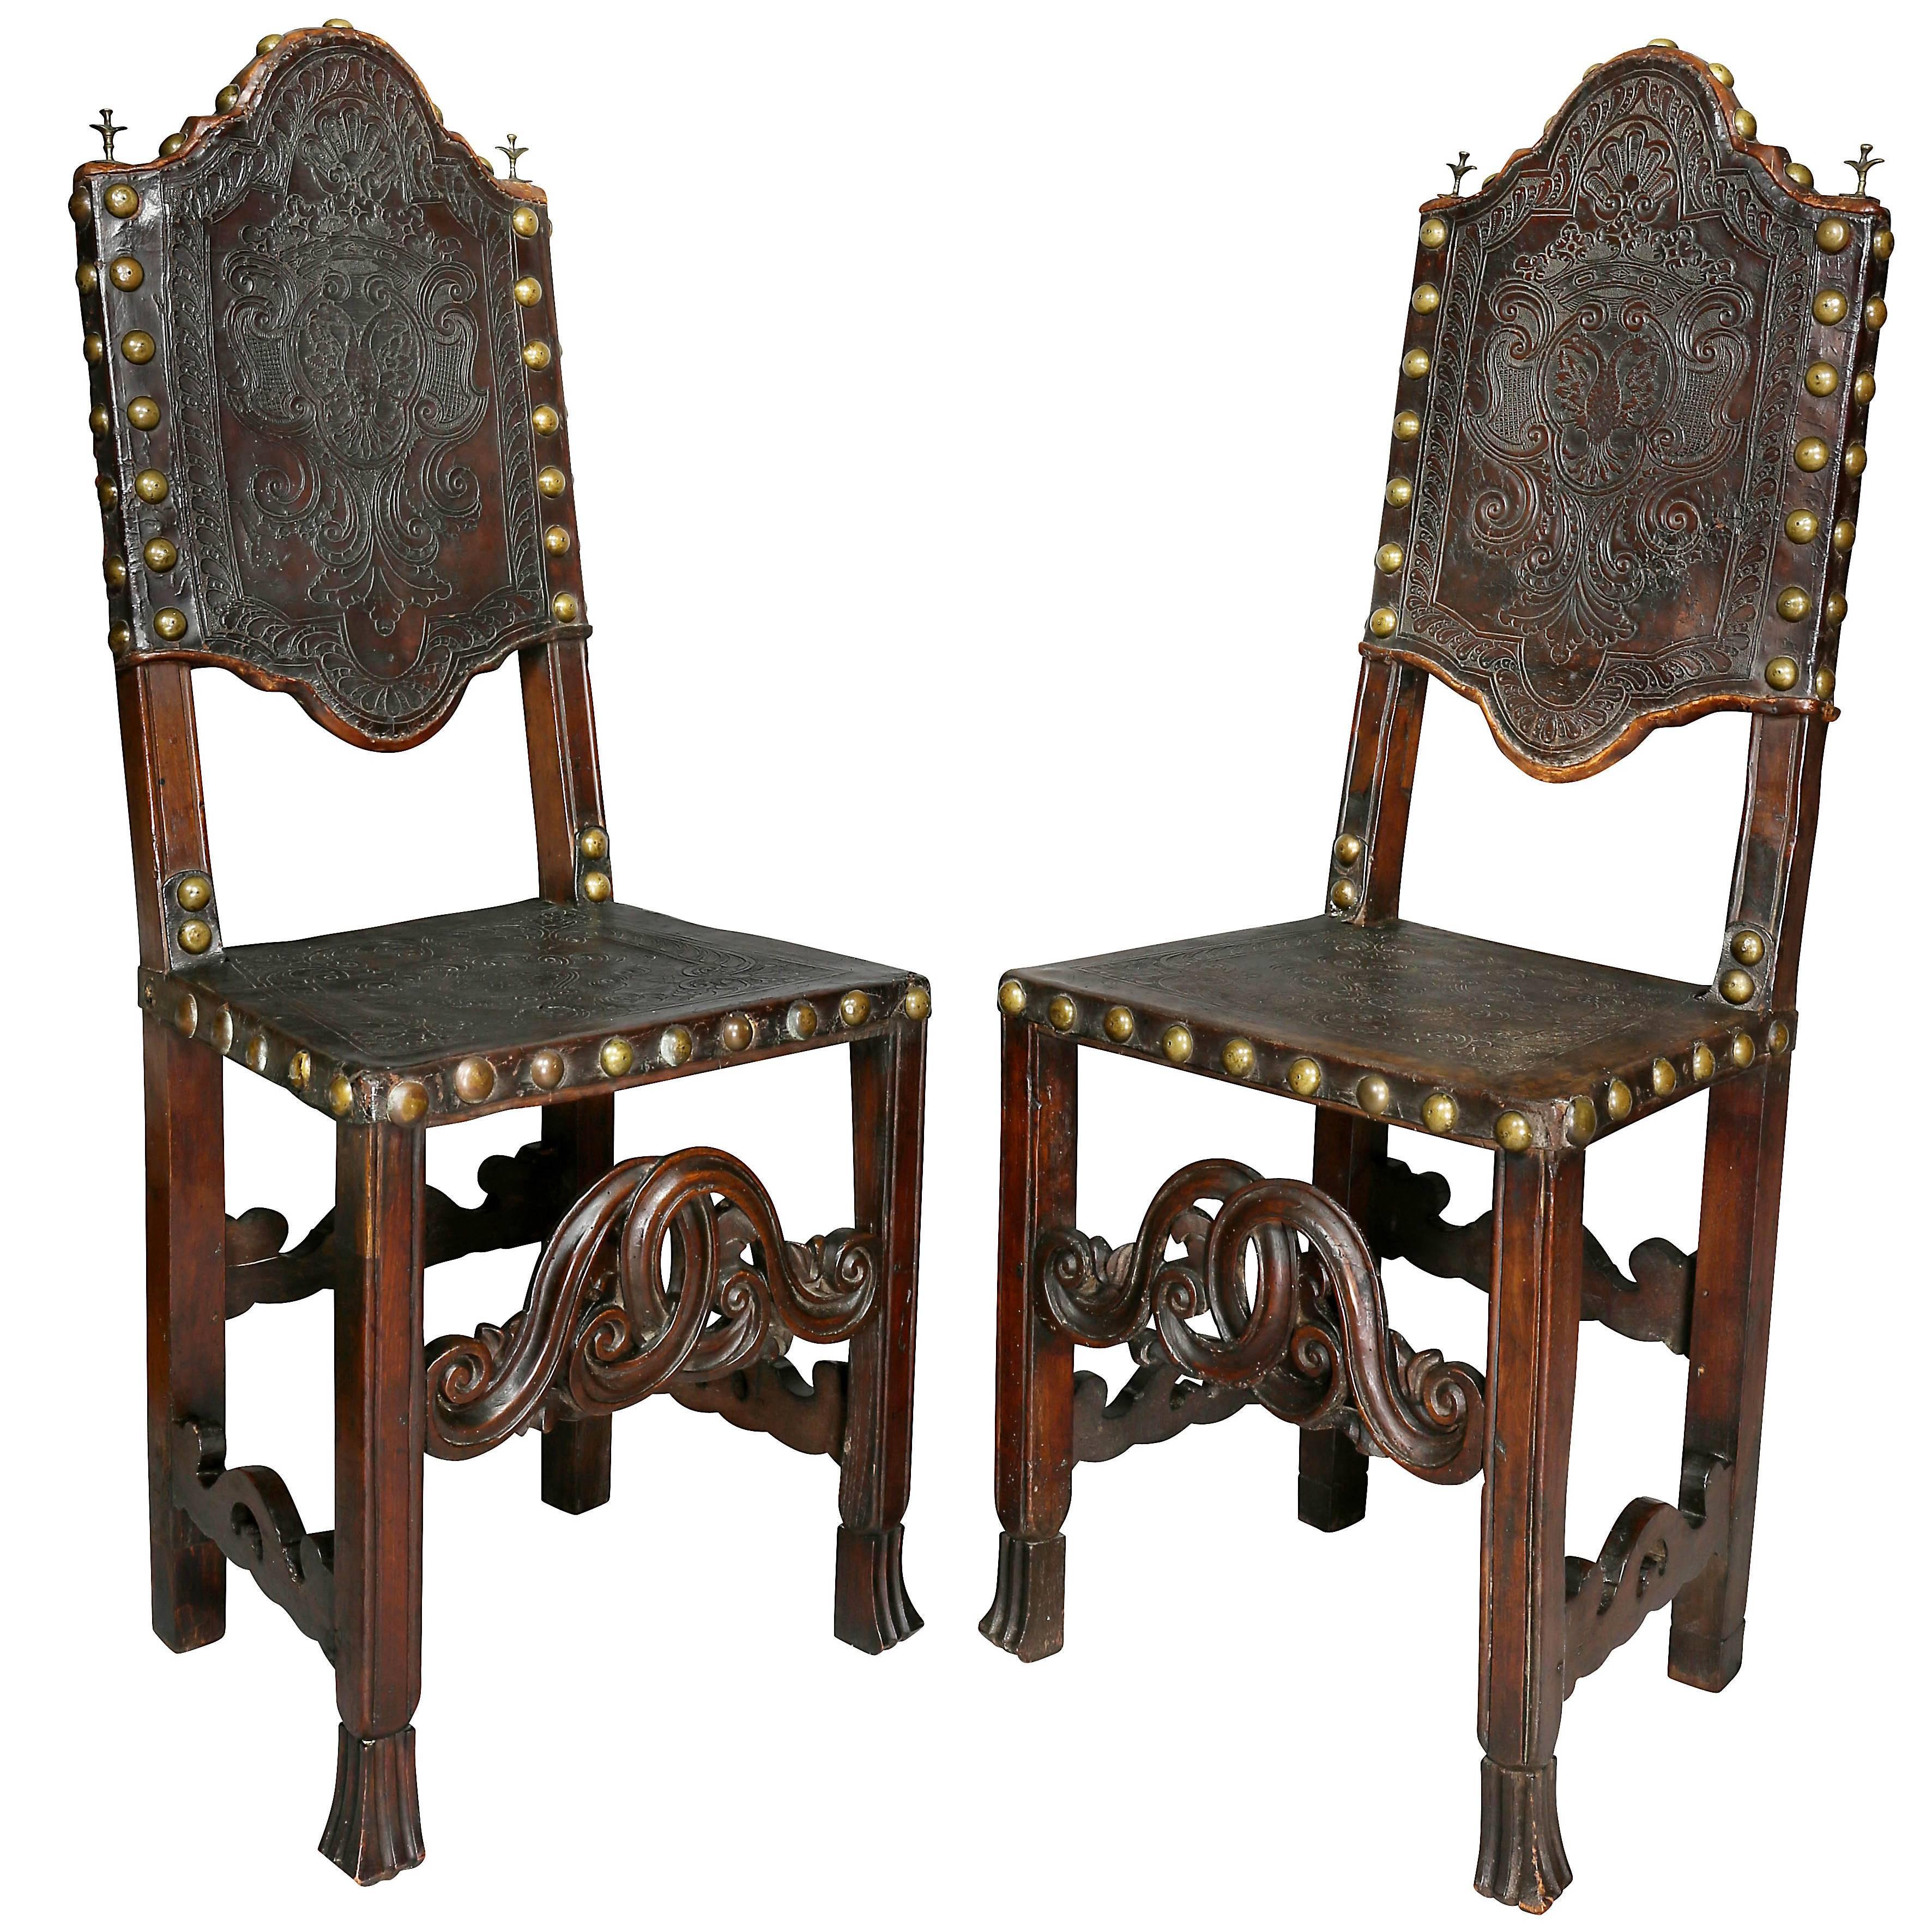 Pair of Portuguese Baroque Walnut Side Chairs